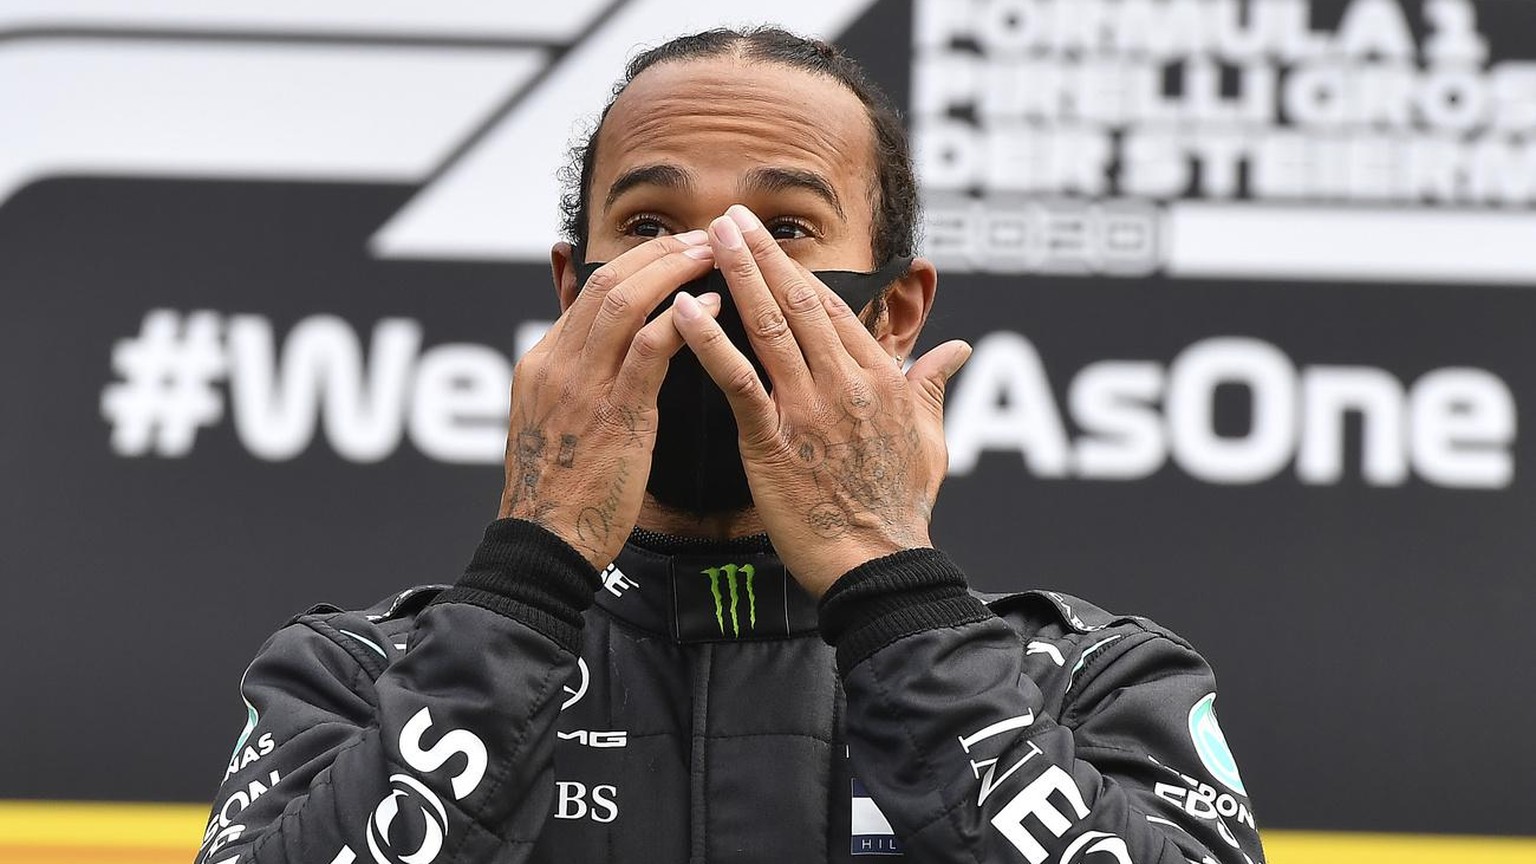 Mercedes driver Lewis Hamilton of Britain celebrates on the podium after winning the Styrian Formula One Grand Prix at the Red Bull Ring racetrack in Spielberg, Austria, Sunday, July 12, 2020. (Joe Kl ...